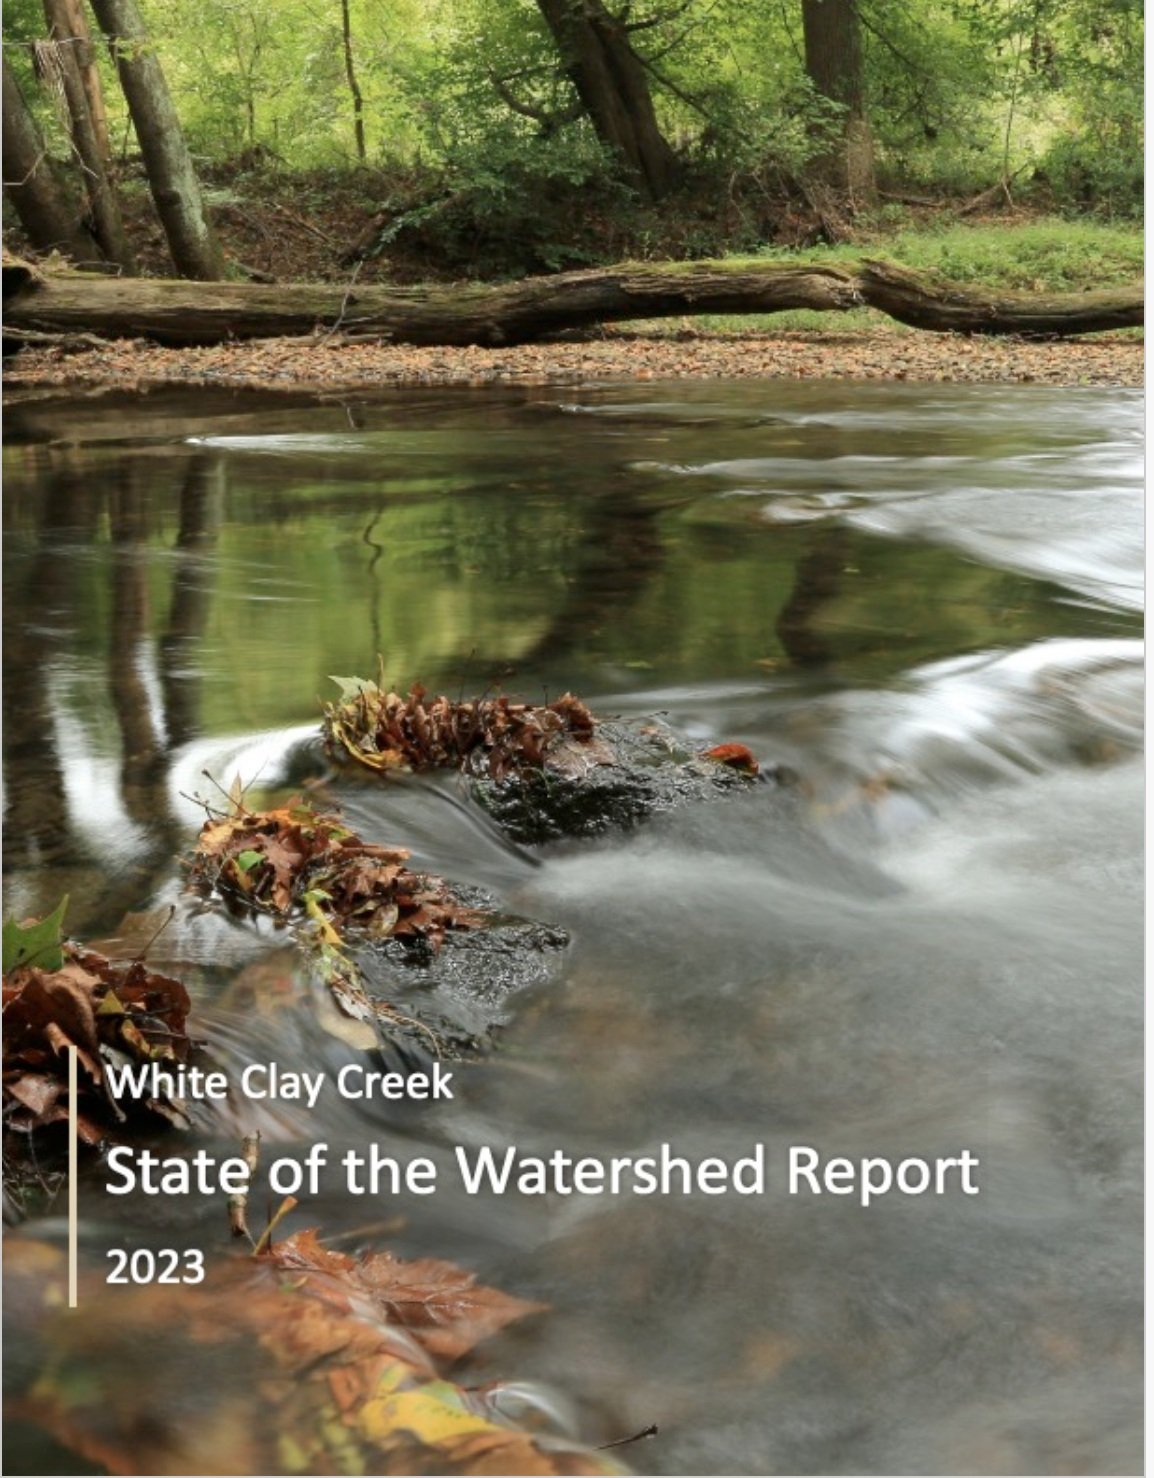 2023 state of the watershed